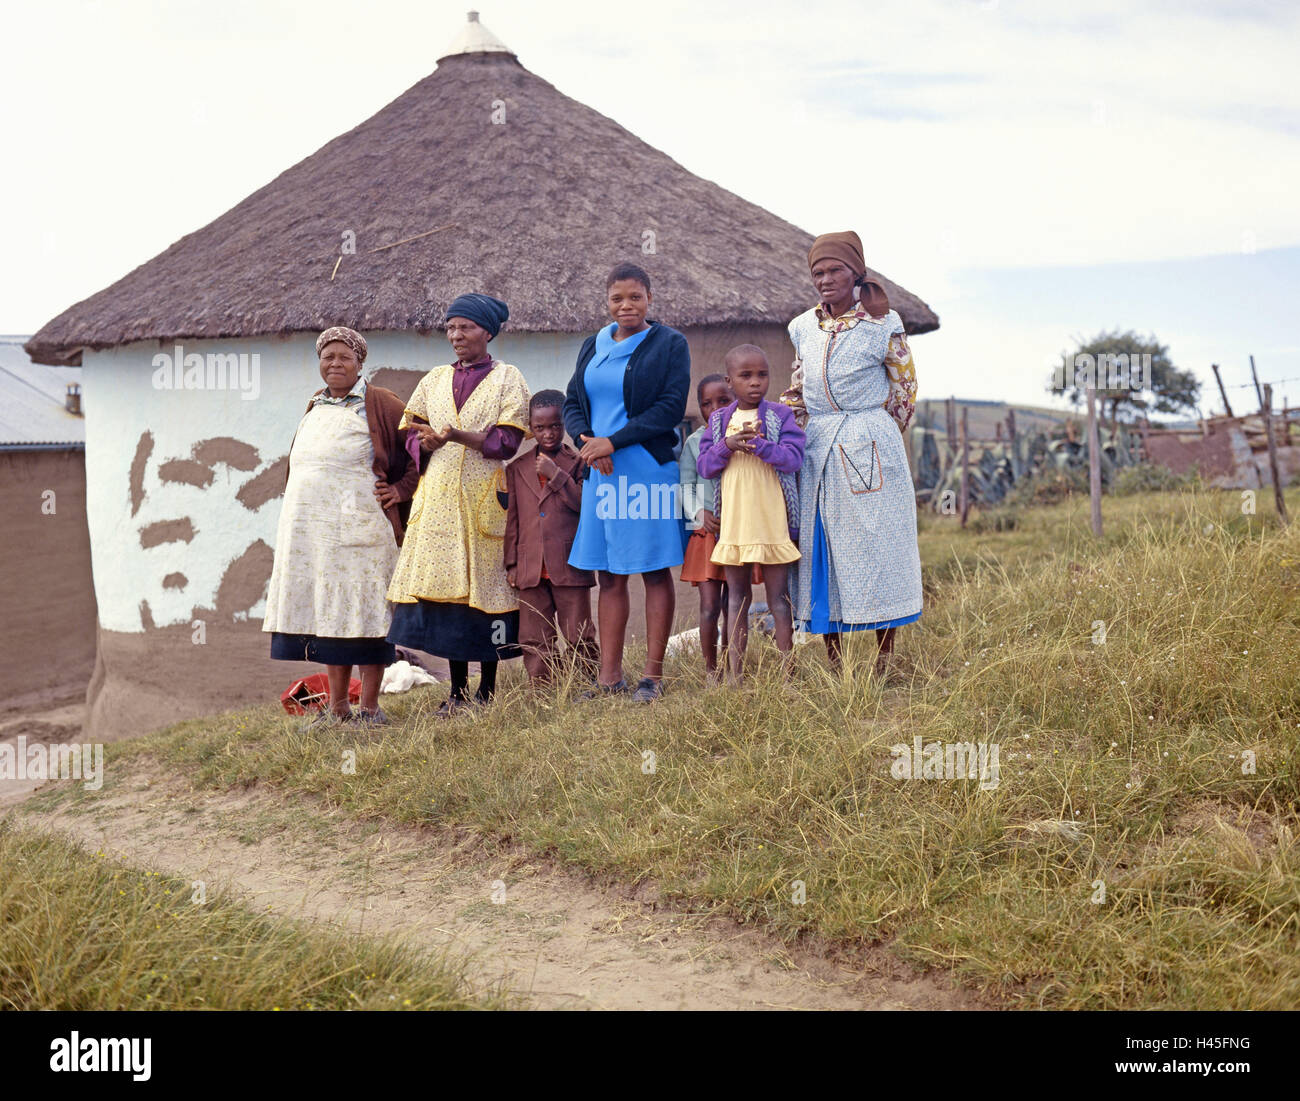 South, Africa, Transkei, village, Xhosa strain, women, children, hut, Africa, east cape, Xhosa, Xhosas, to Kaffern, Bantu people, settlement, people, tribe, dark-skinned, non-whites, Africans, group, group picture, outside, Stock Photo